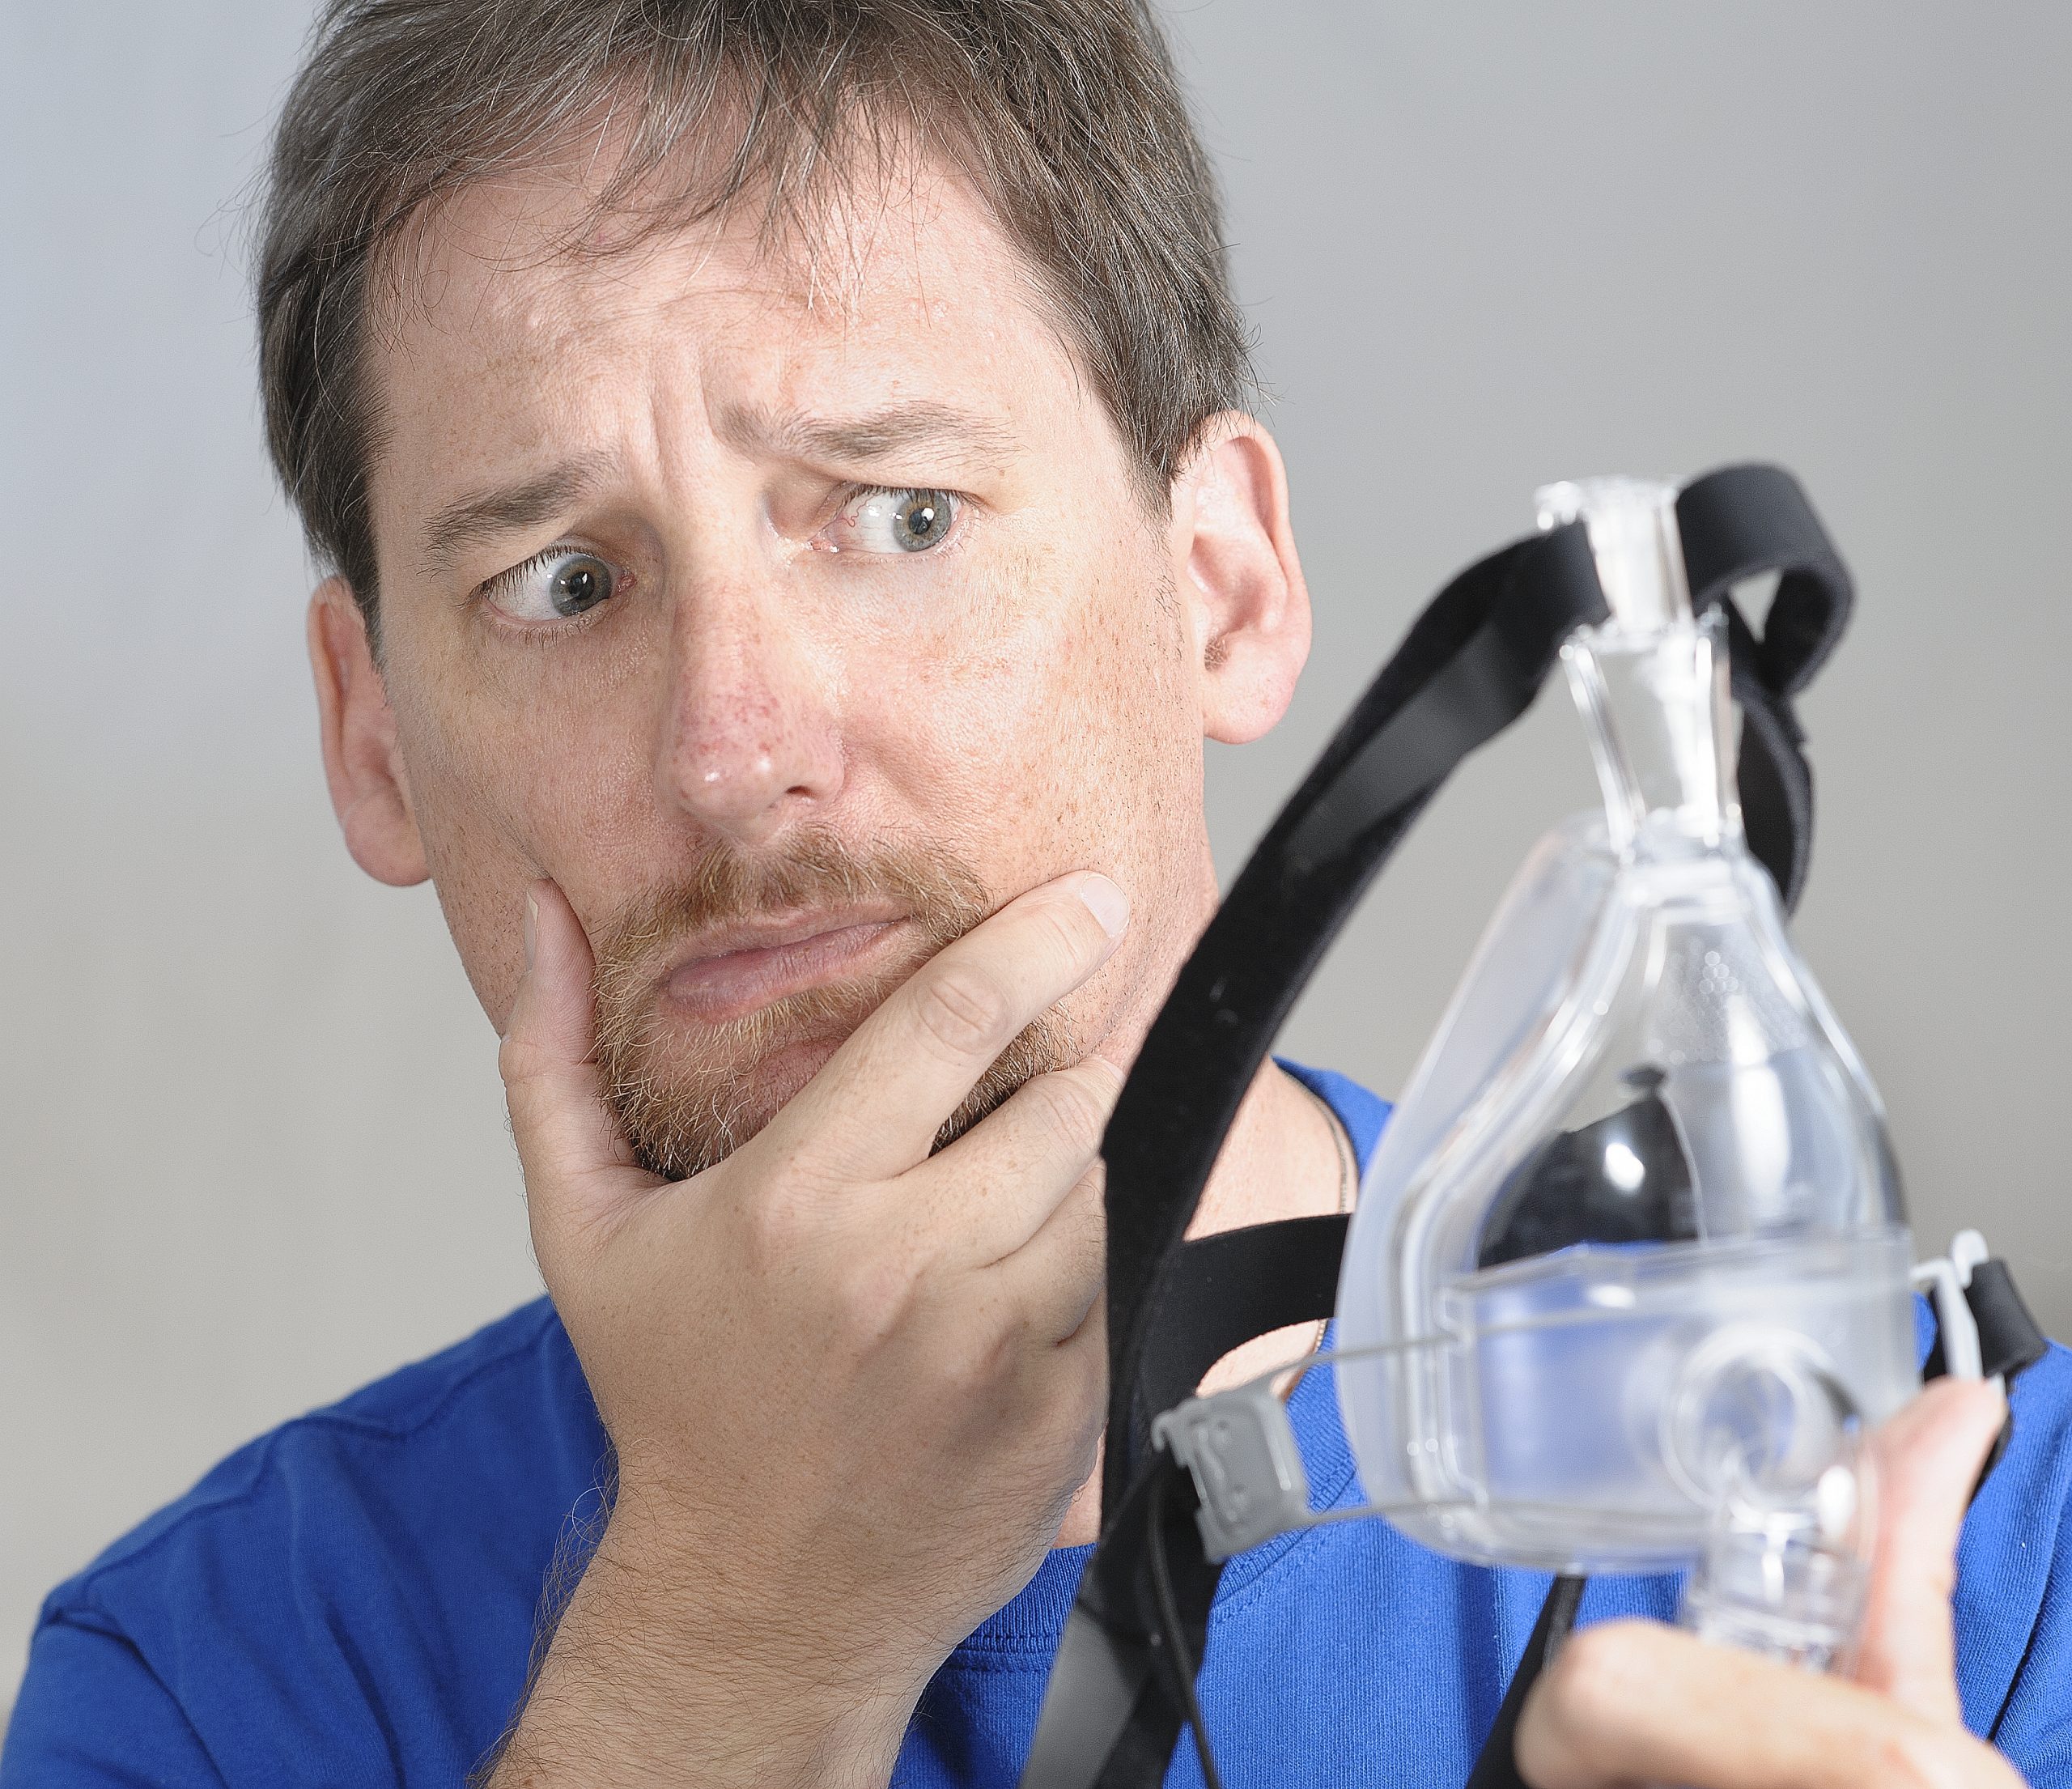 Needing a CPAP mask